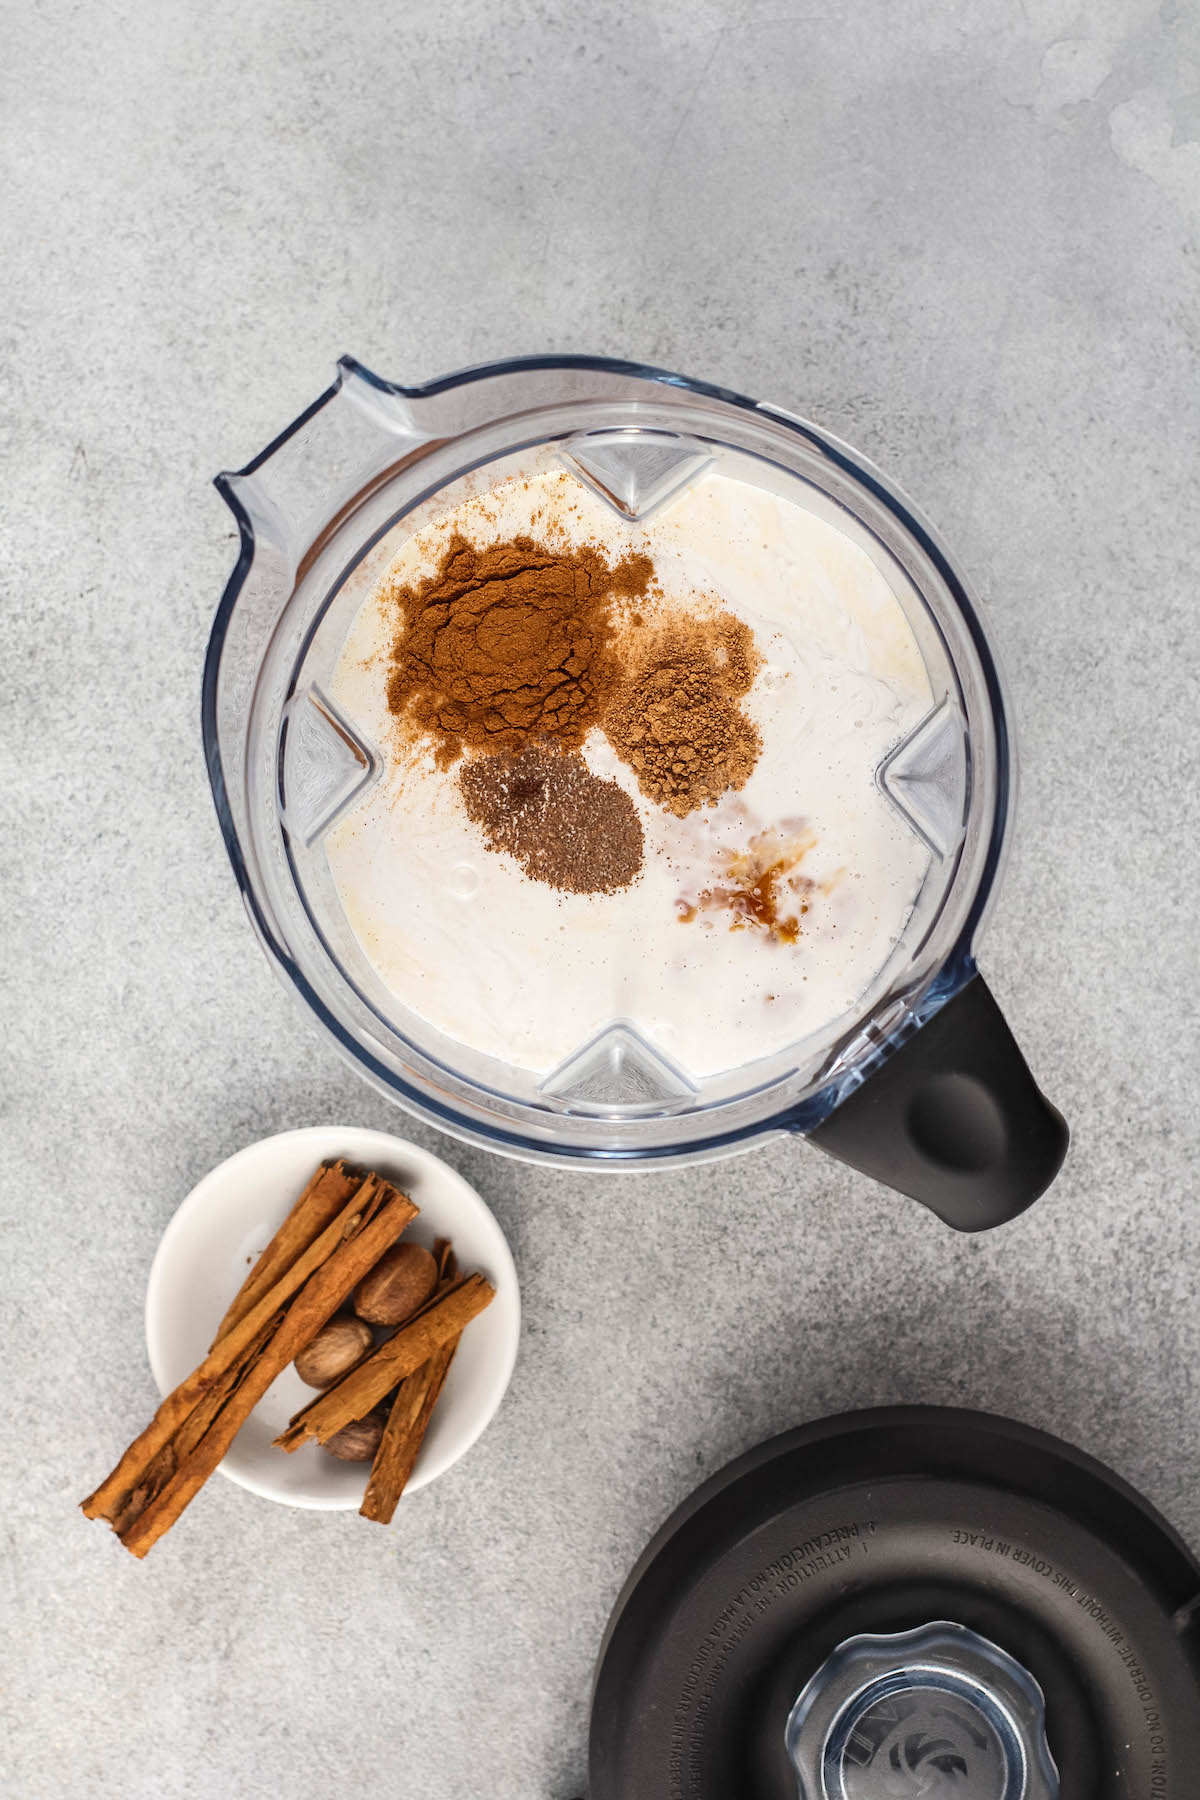 Spices and milk added to a blender with a bowl of spices next to it.